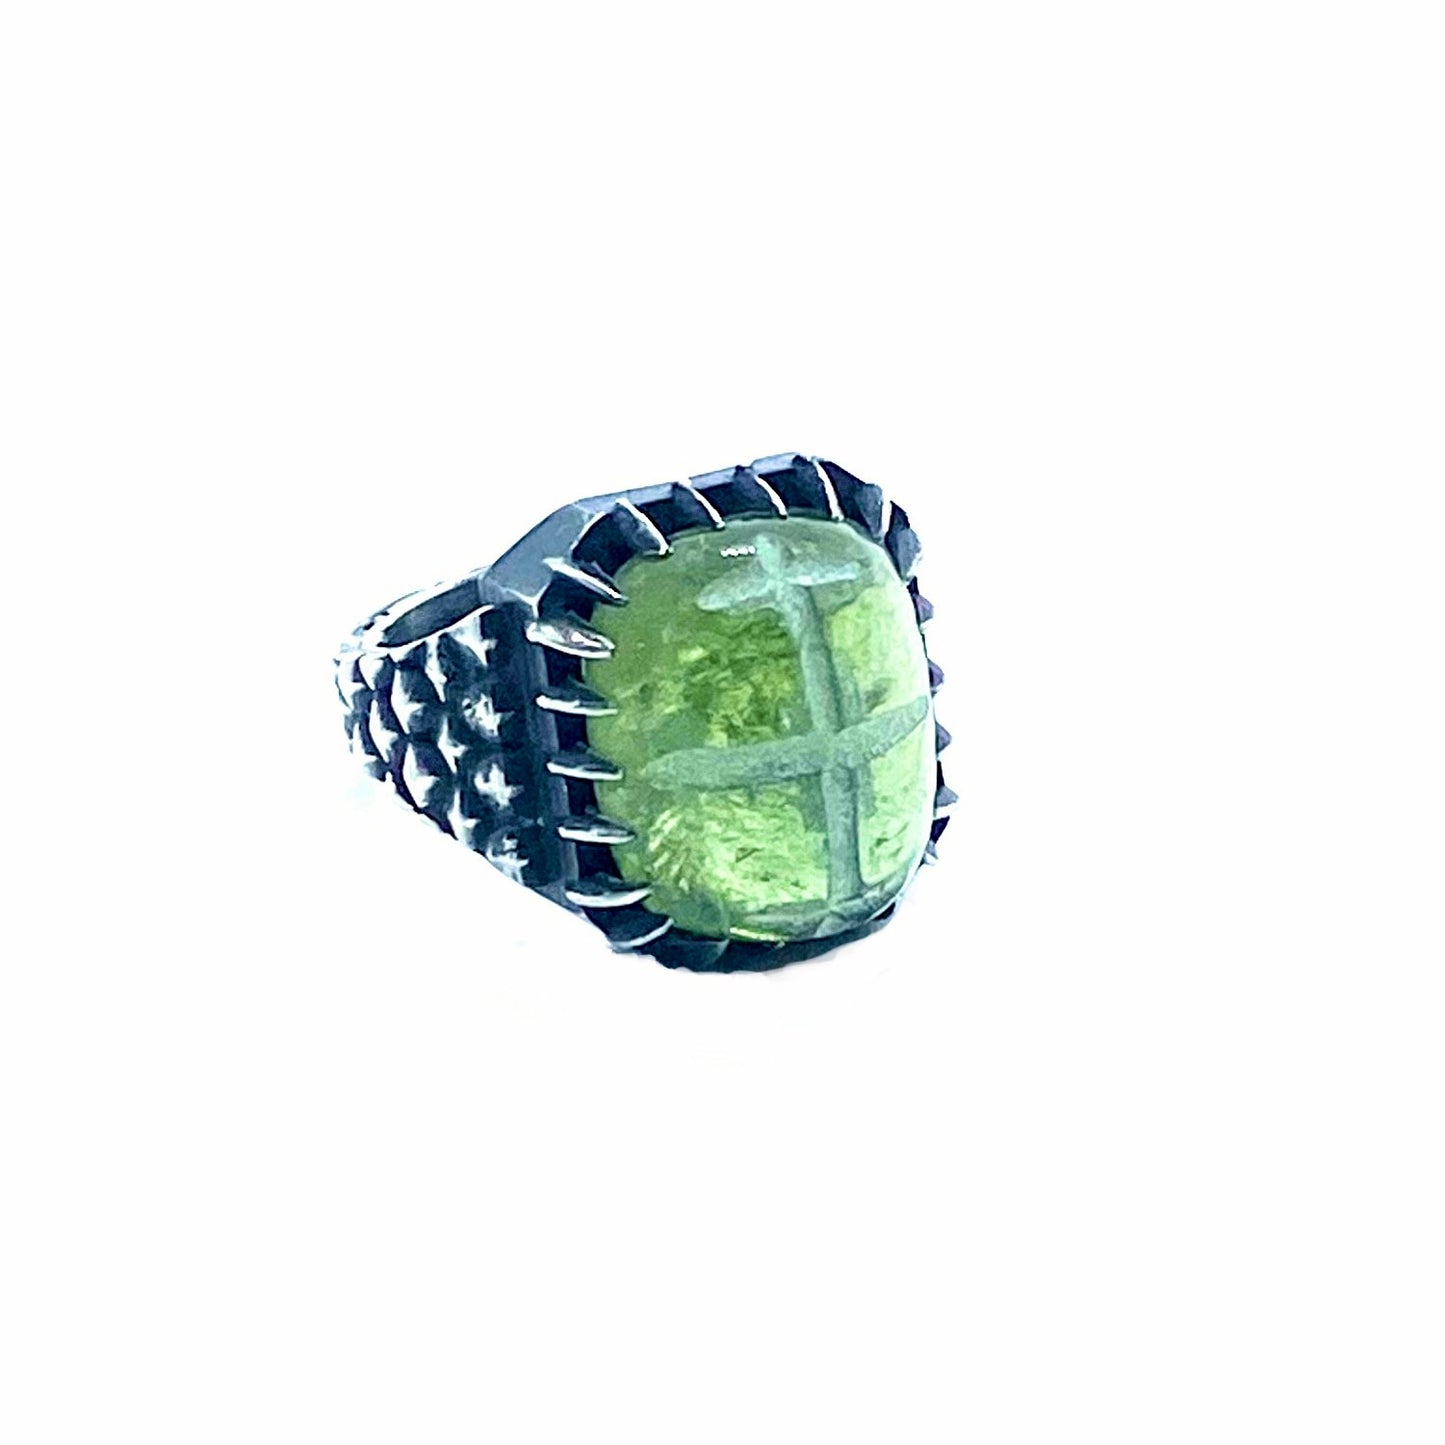 Brutalist Ring with Tourmaline in Sterling Silver